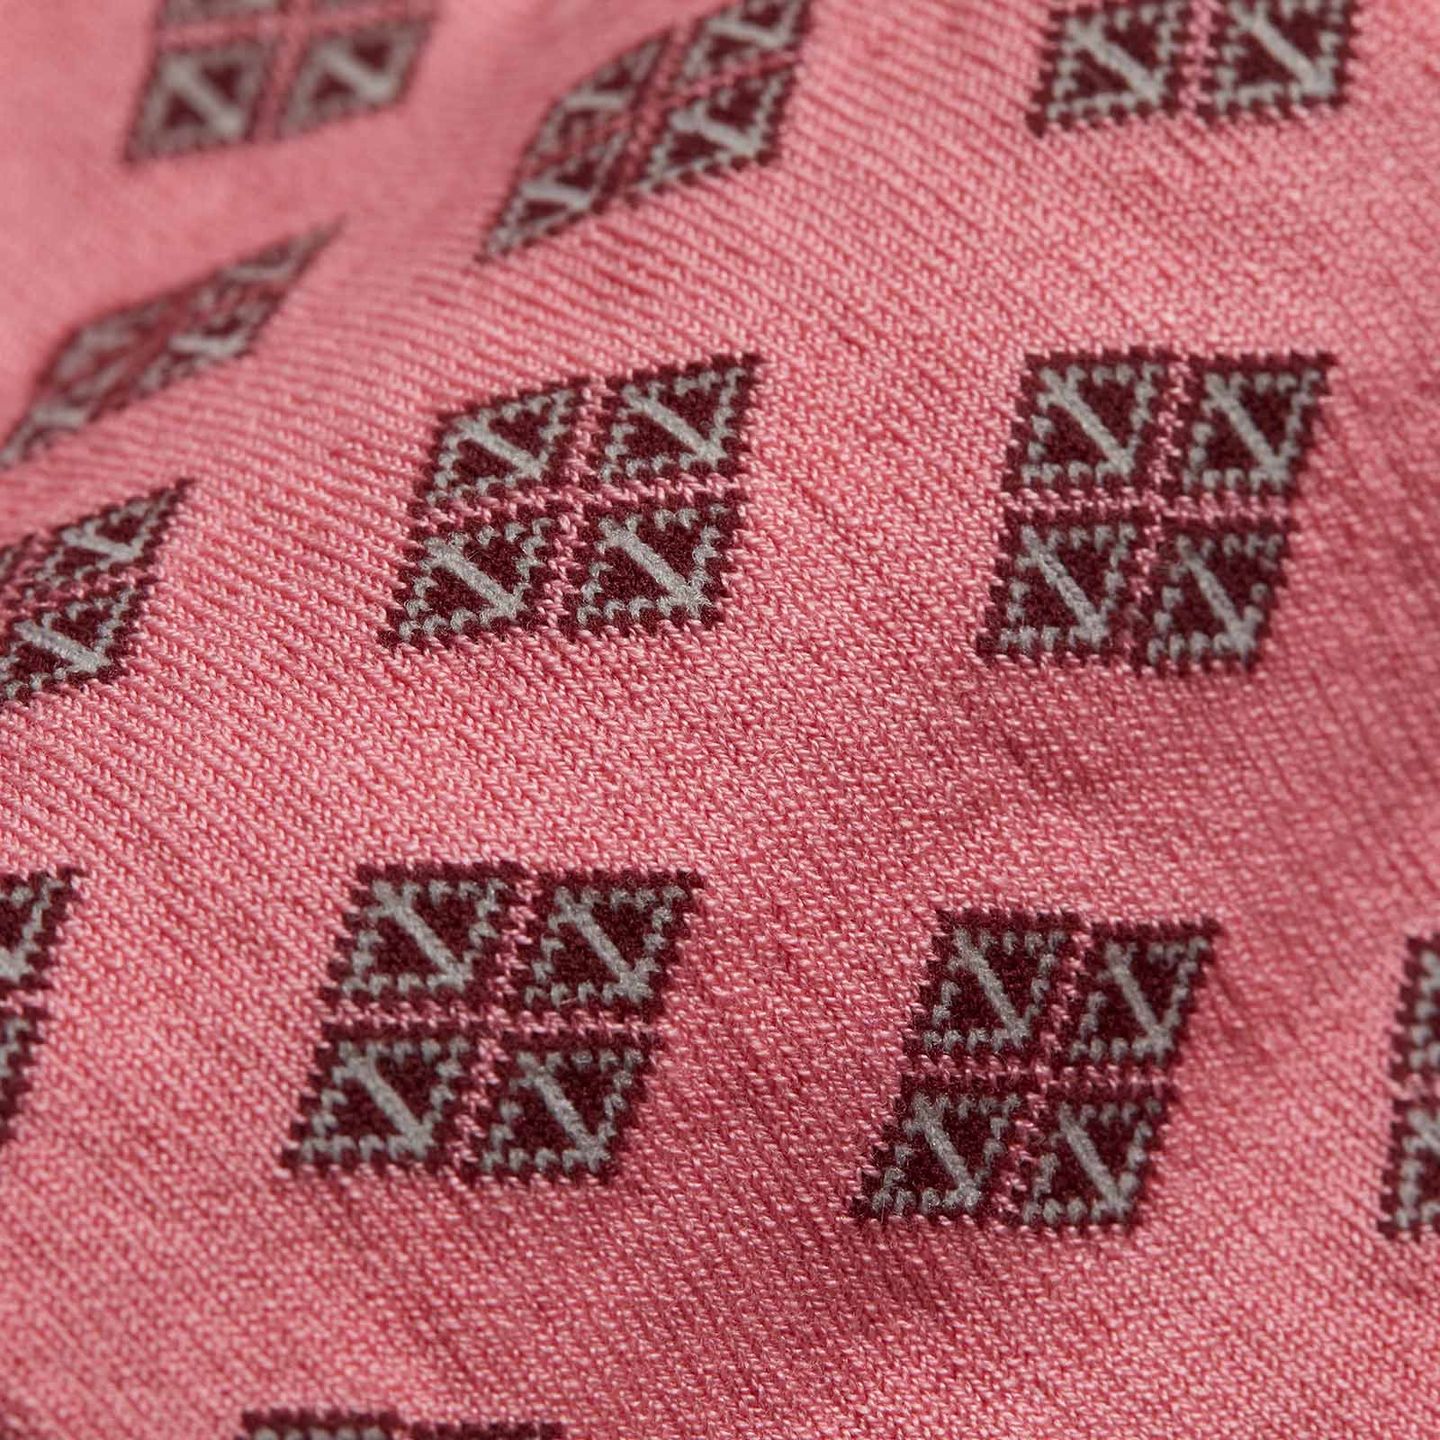 A close up of a pink sock with squared patterns